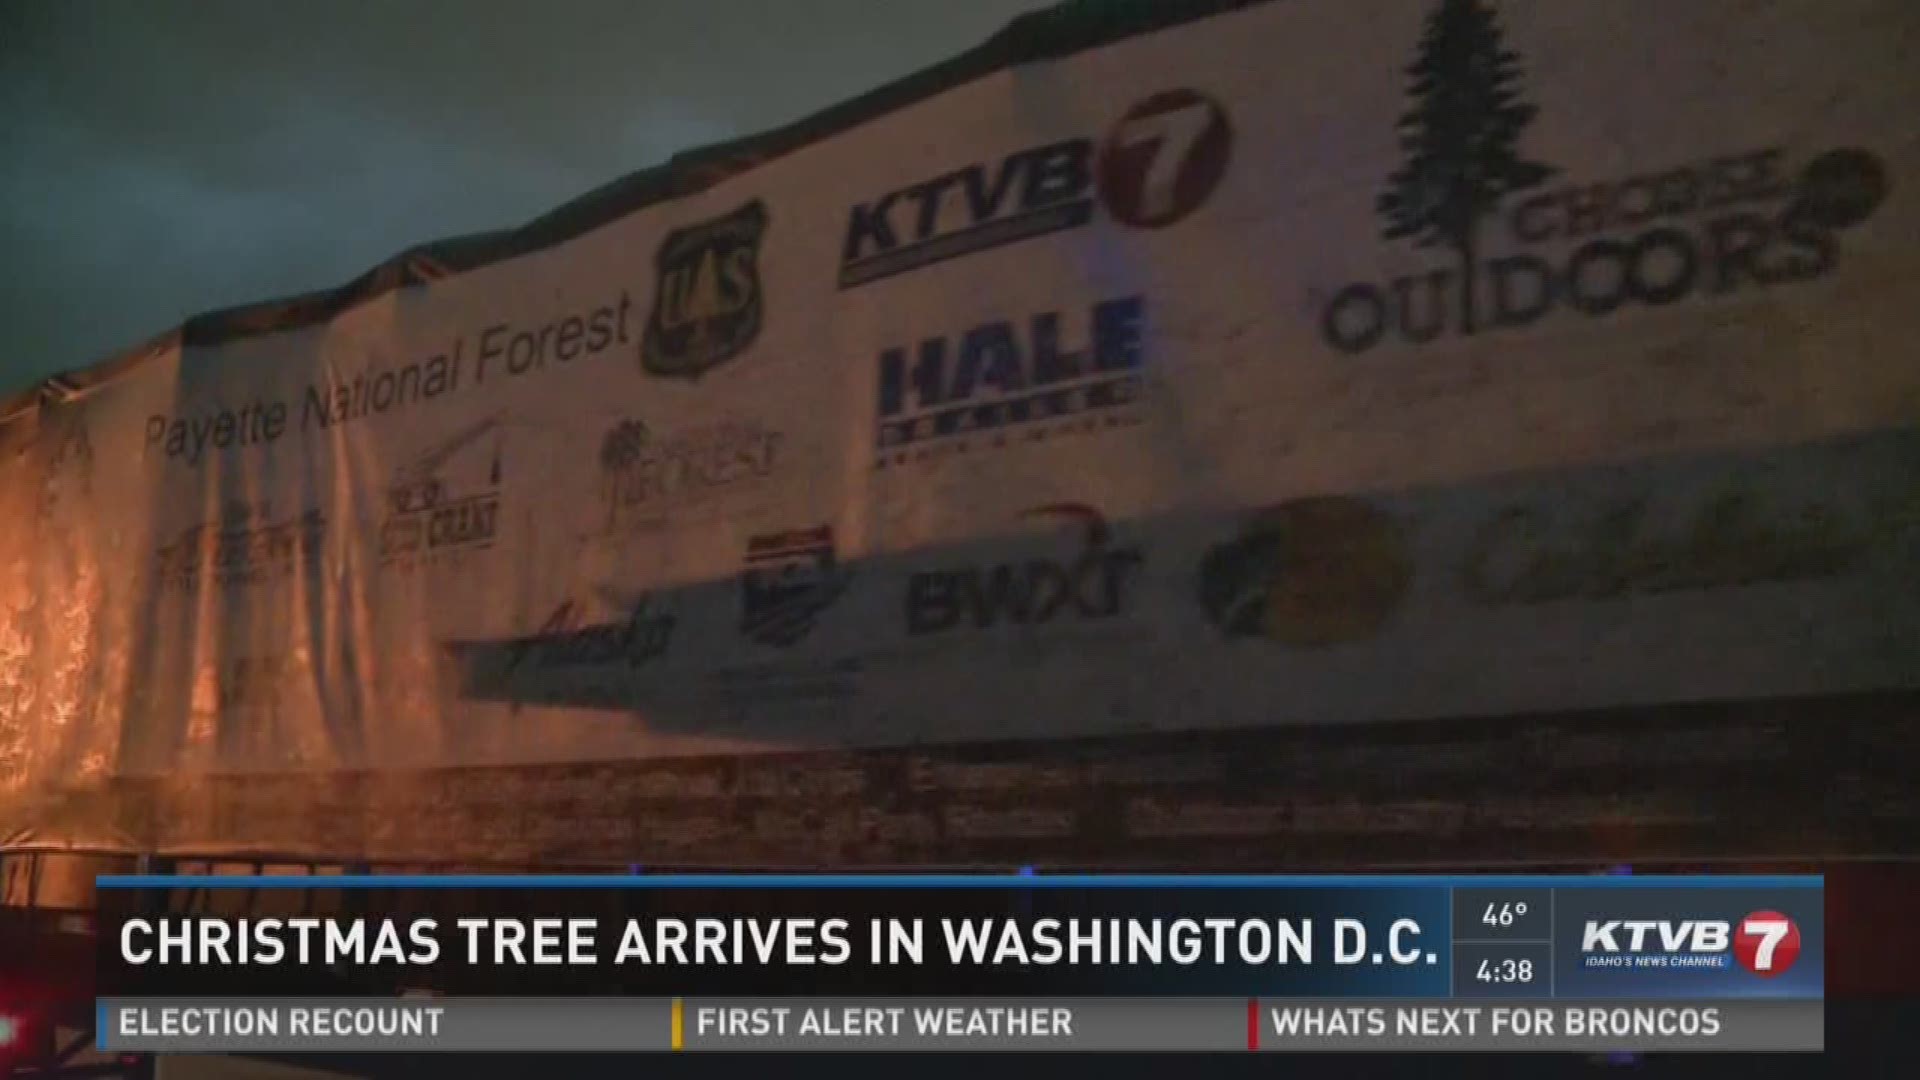 Capitol Christmas Tree completes cross-country journey from Idaho to D.C.